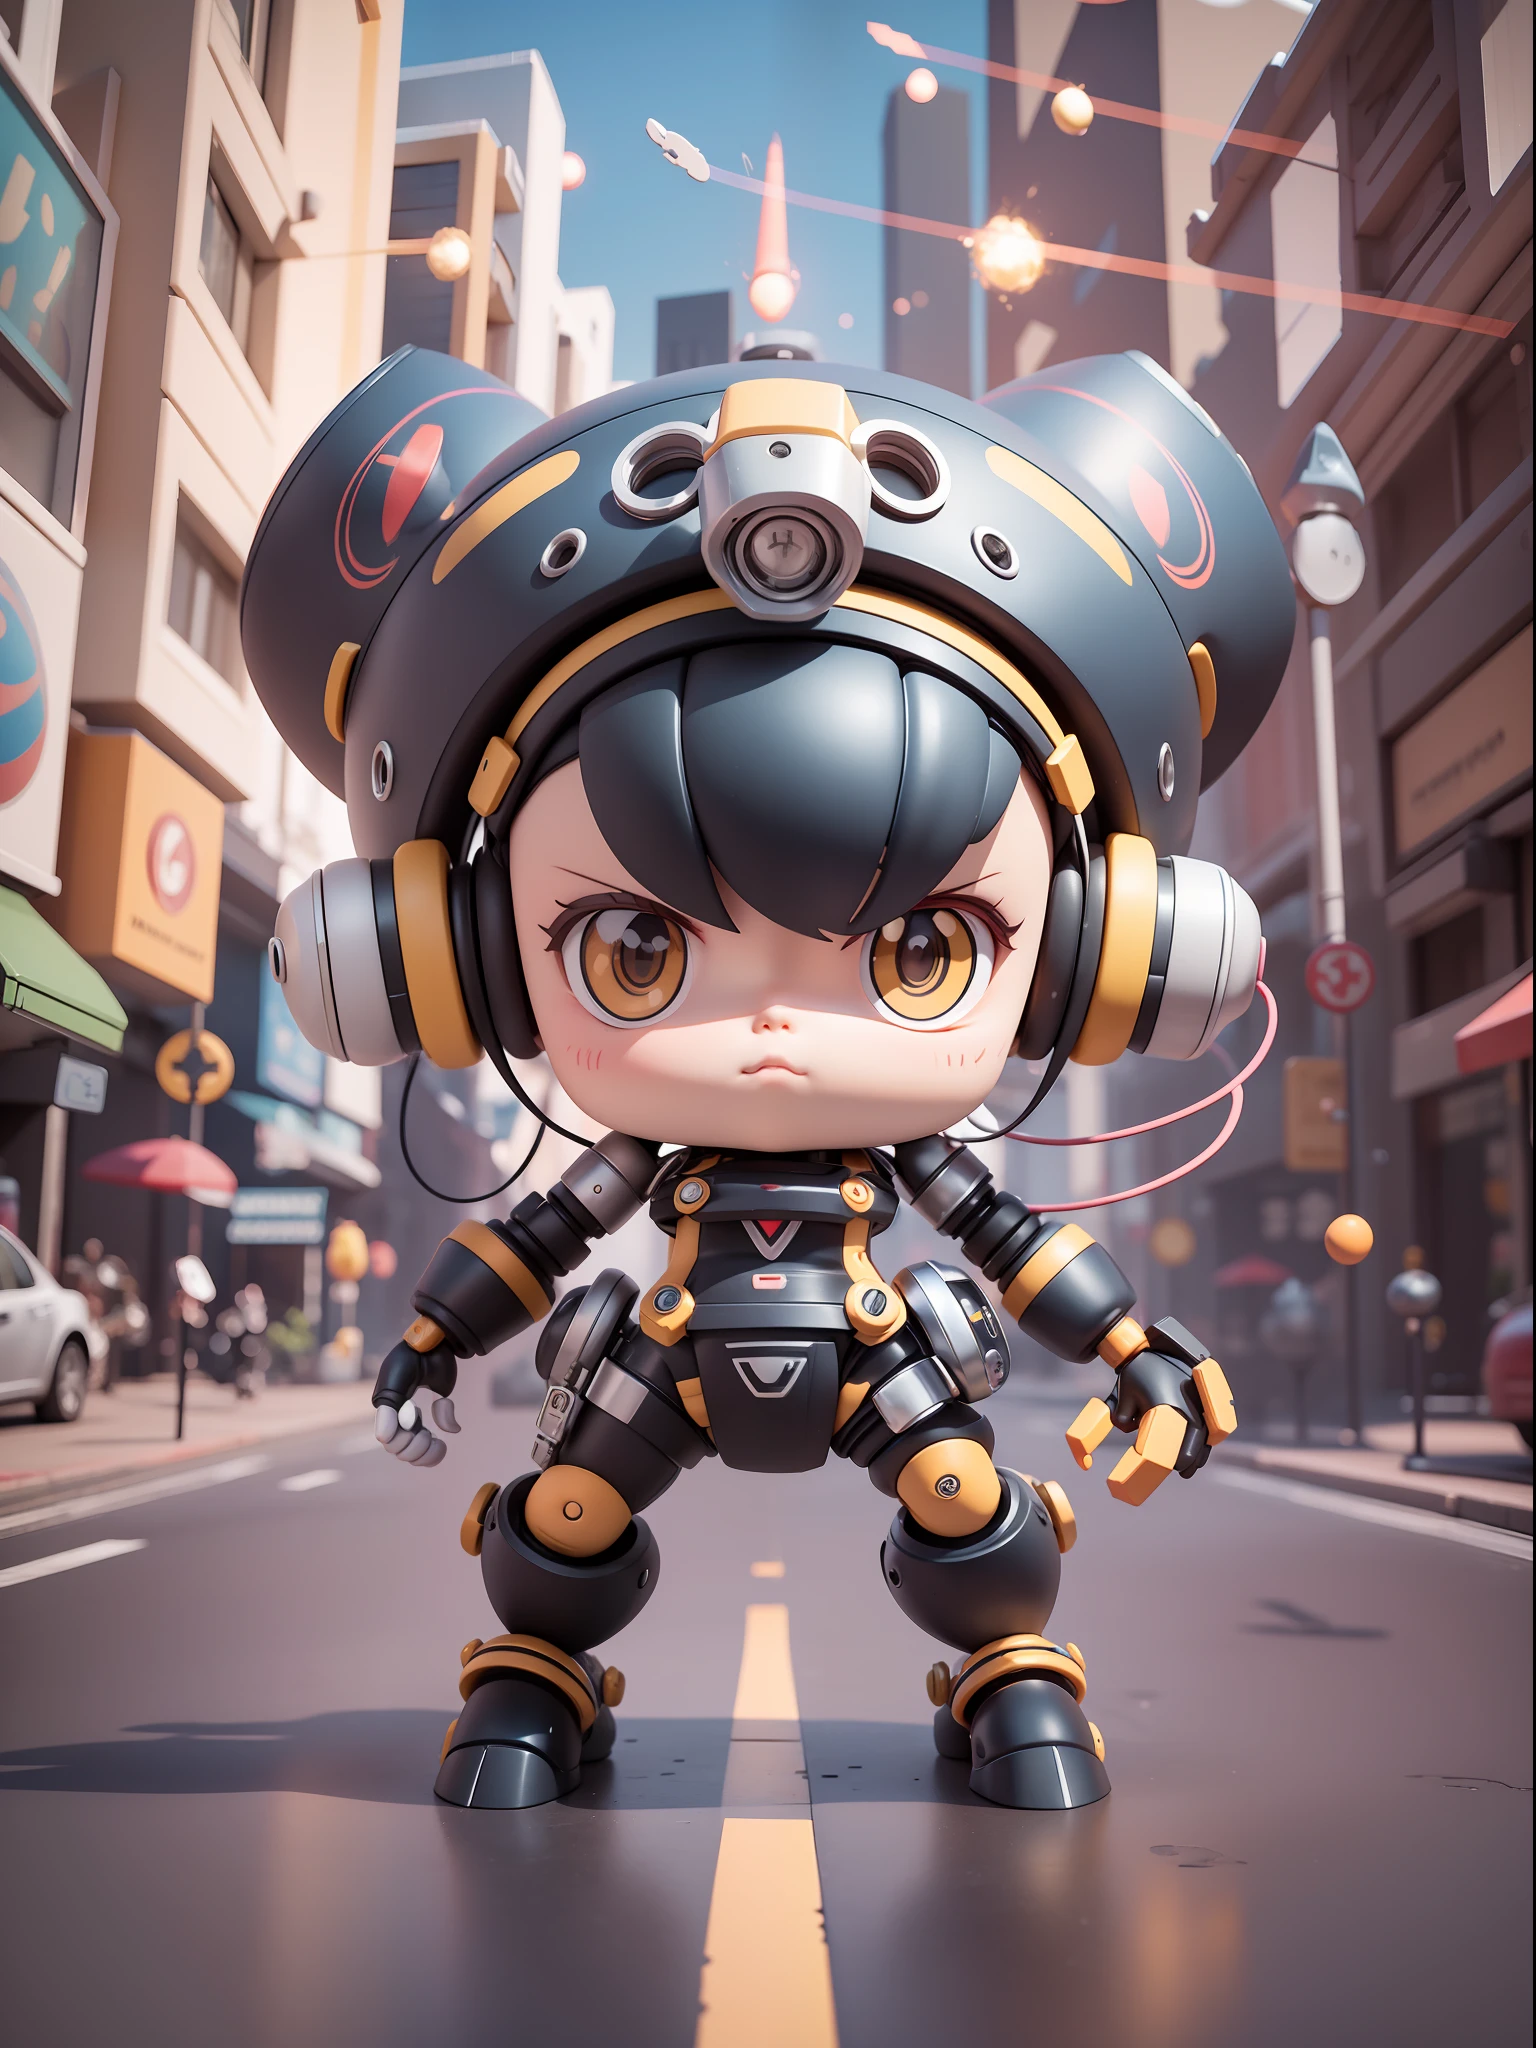 (Mechanical Monkey: 1.331), Tesla Coil, (Mechanical Monkey Tail), Cute Style, Small, Big Head, 3D Rendering, ((Q Version)), Pokémon Style, Machine Style, Cinematic Texture, Figure, Pokémon, Movie Lights, Heavy Robotic Arm, Mechanical Belly, Mechanical Legs, Mechanical Legs, Mechanical Feeling, Background Surround Lightning, Spinning, Colorful Lightning, Cool, Clean White Background, Ray Tracing, Premium Colors, Full Body 3D Model, Action, Fashion Blind Box Toys. (fill body:1.2)，chibi